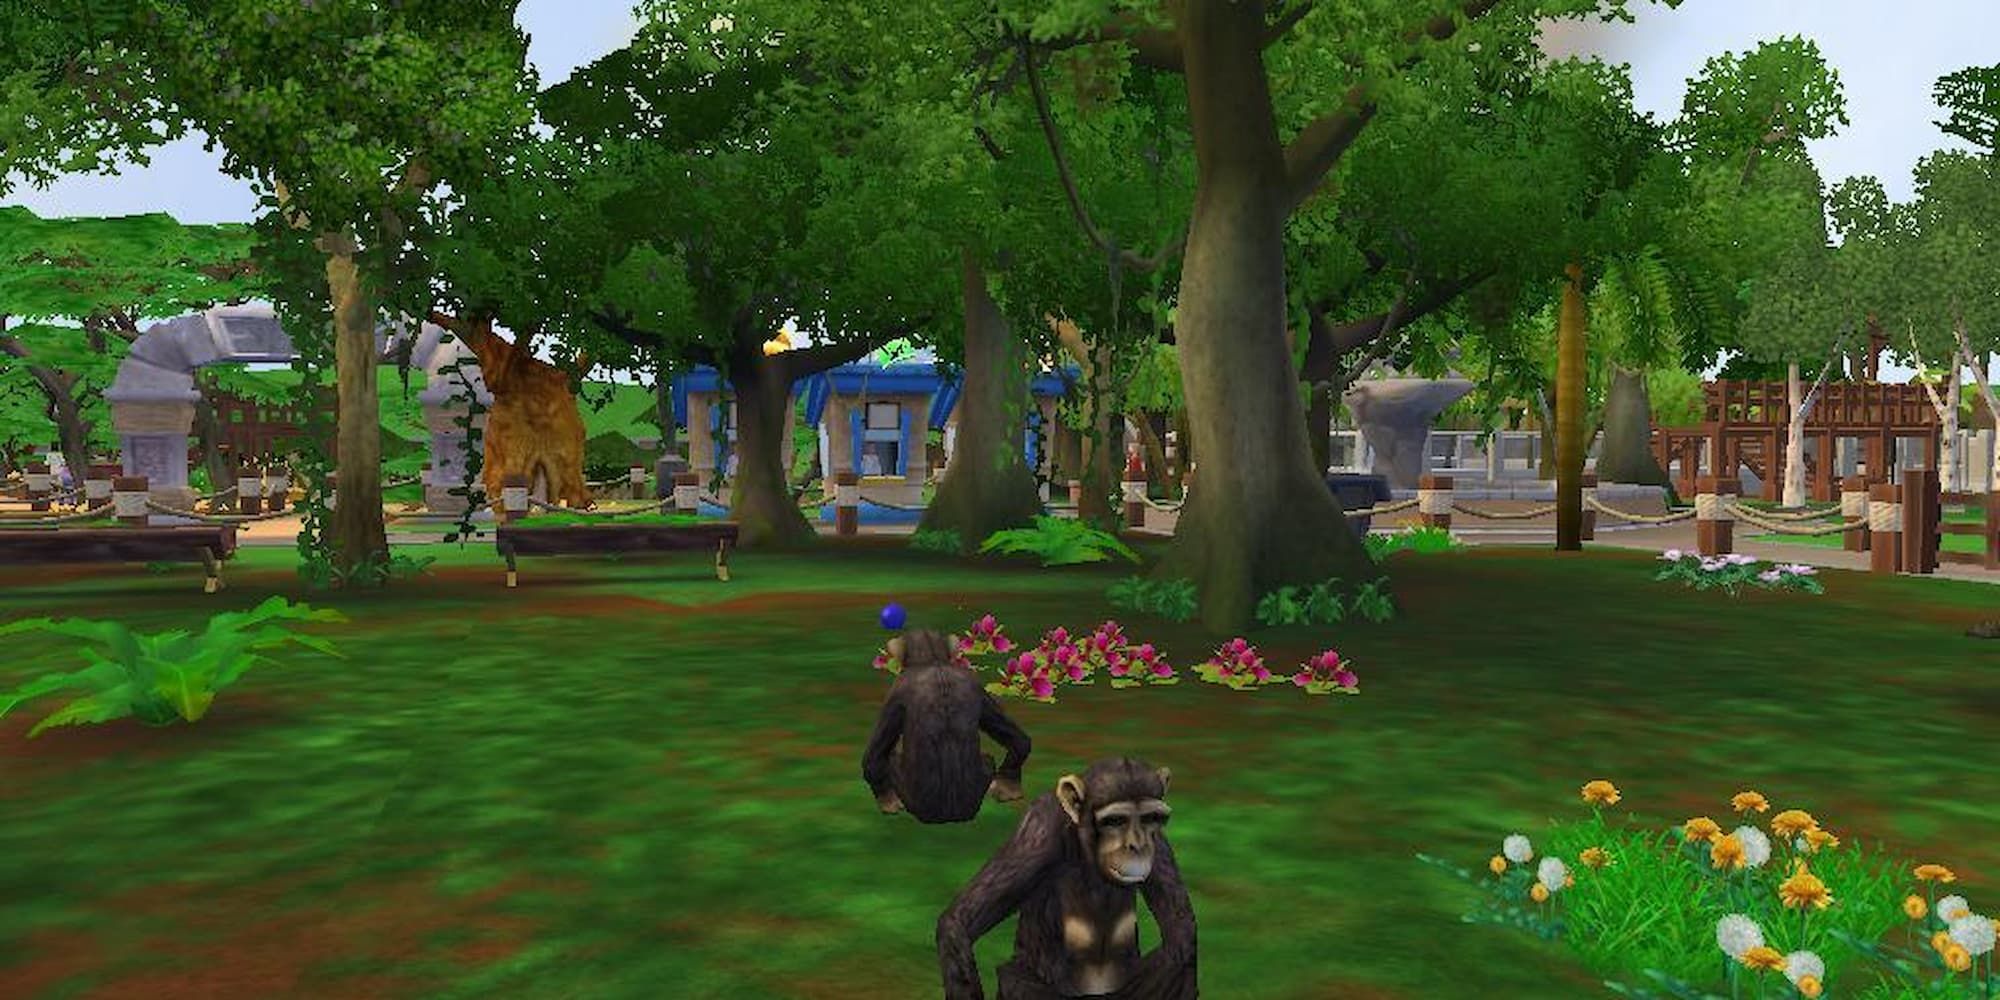 Chimpanzees sit in their exhibit in Zoo Tycoon 2.